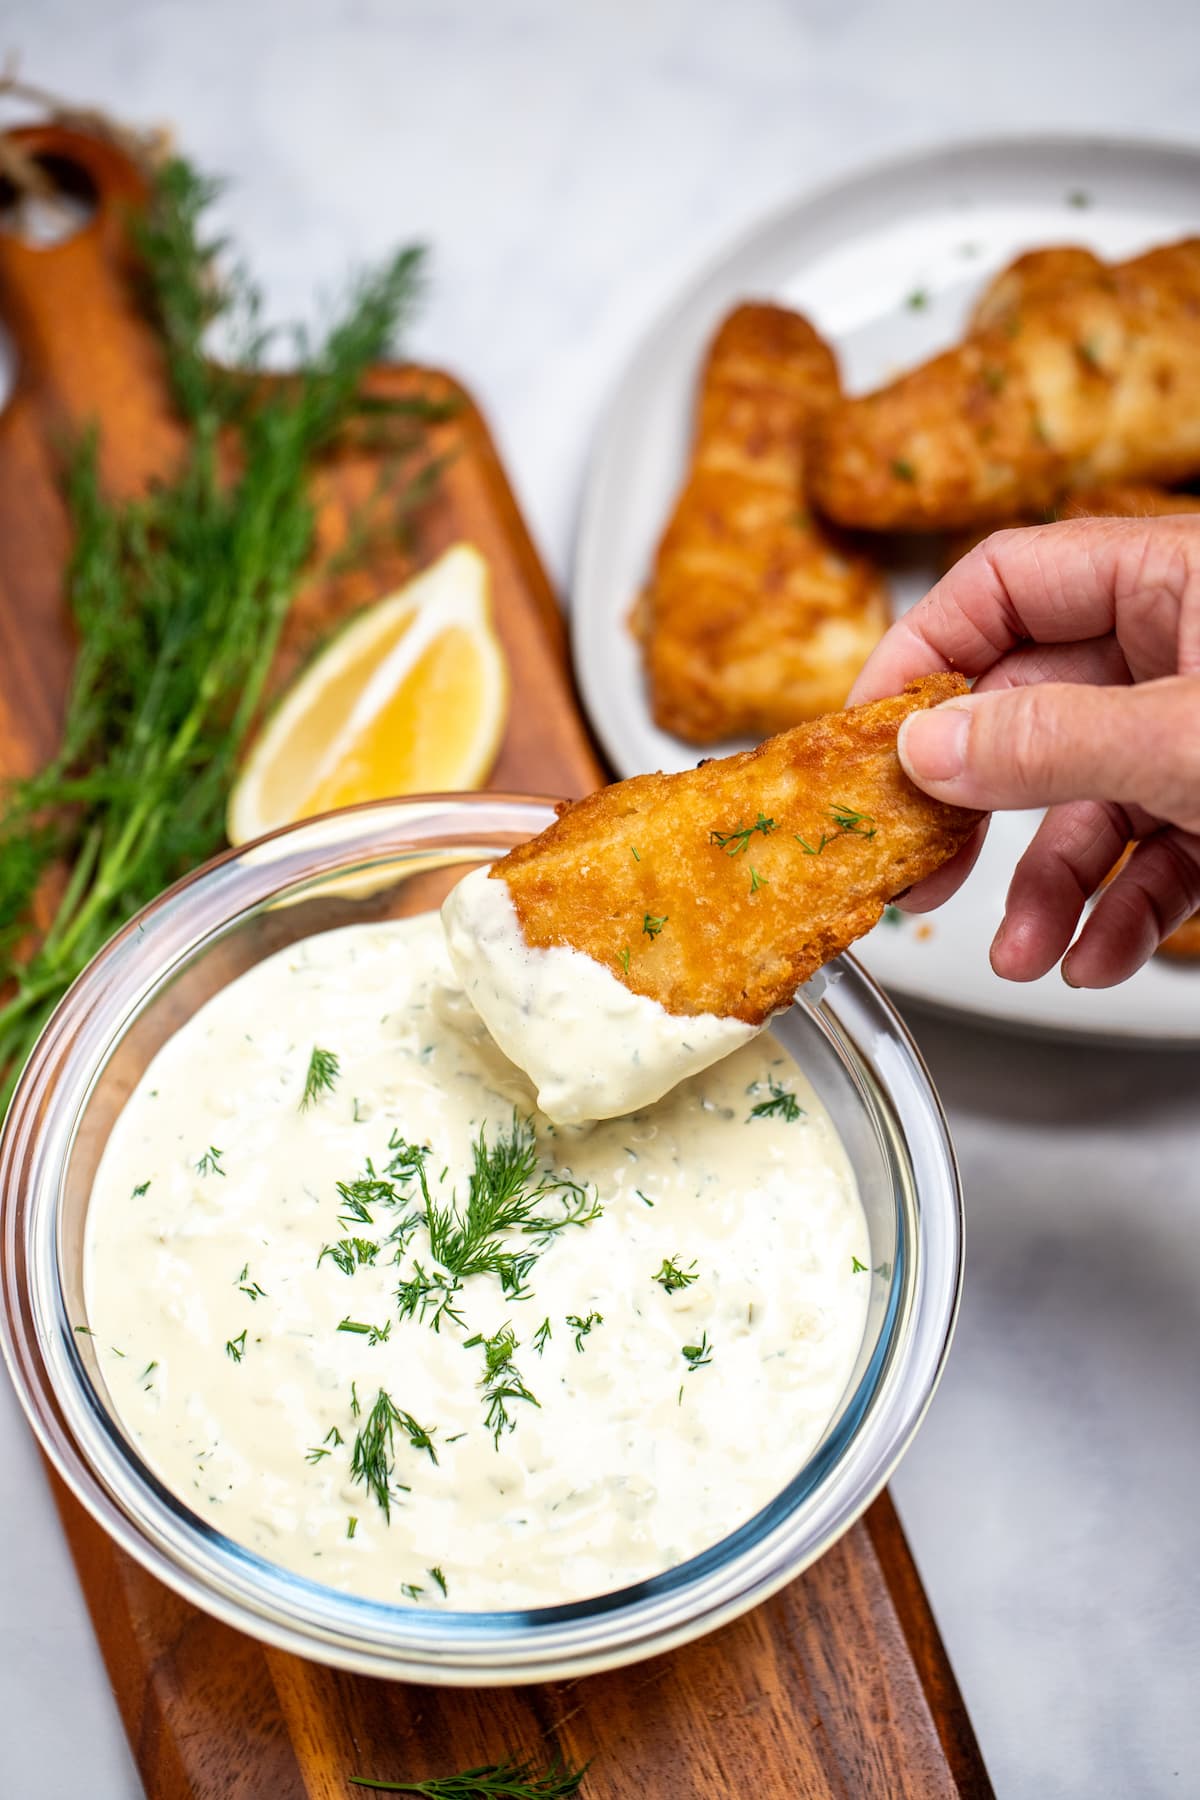 A bowl of homemade tartar sauce on a cutting board, topped with fresh dill and a hand dipping a fish stick into the sauce, with a lemon wedge in the background.